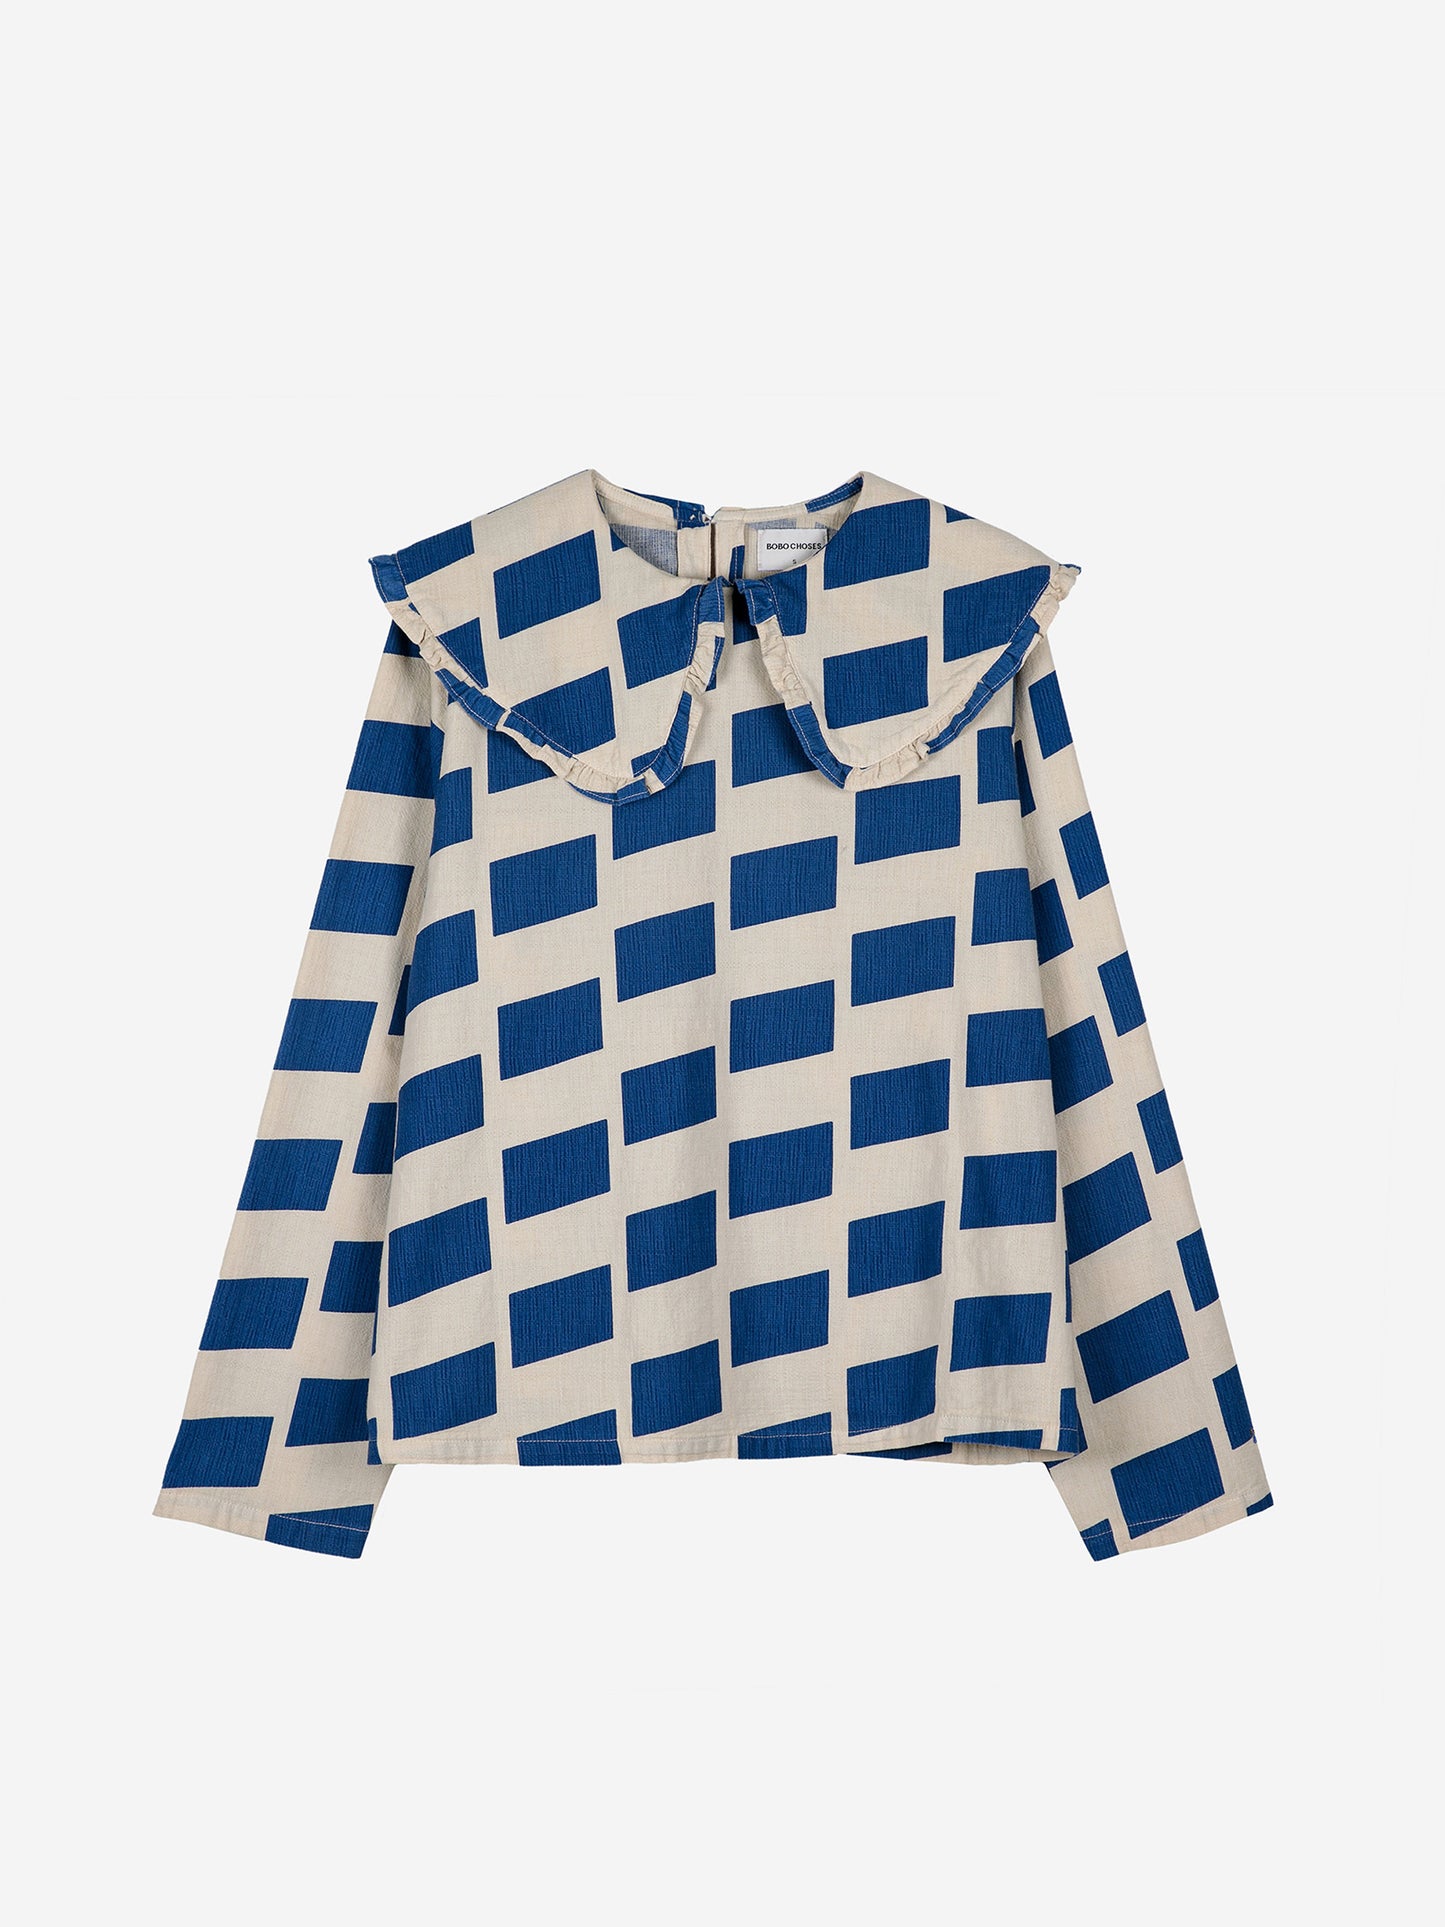 Wide-collared check shirt